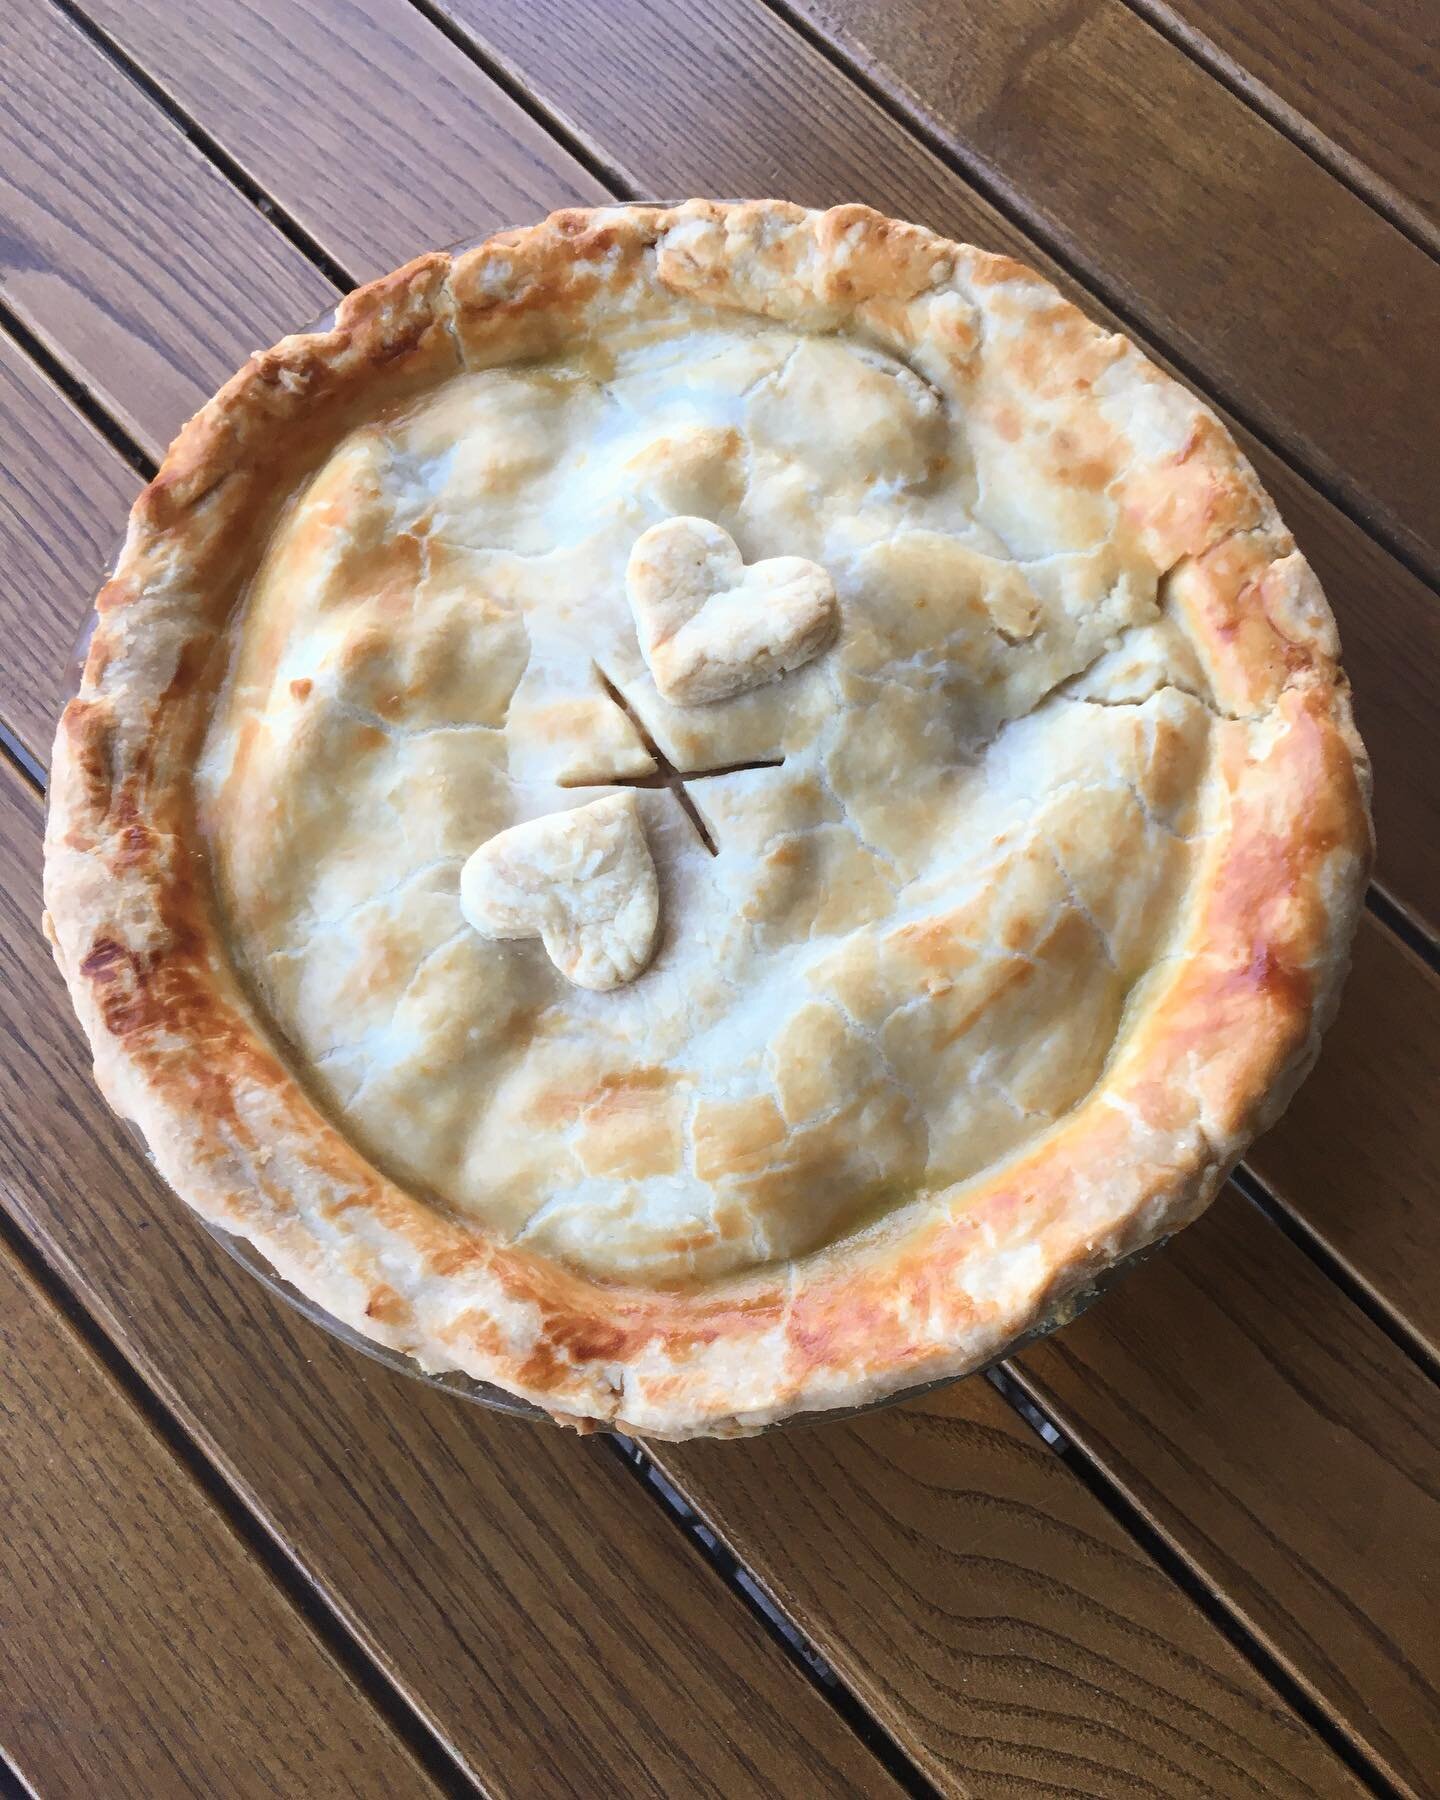 House made Apple pie! recipe from former pastry chef Bill Yosse! An Obama Favorite&hearts;️
.
.
.
.
.
#thenewdeal #newspecial #applepie #outdoordining #burbankfood